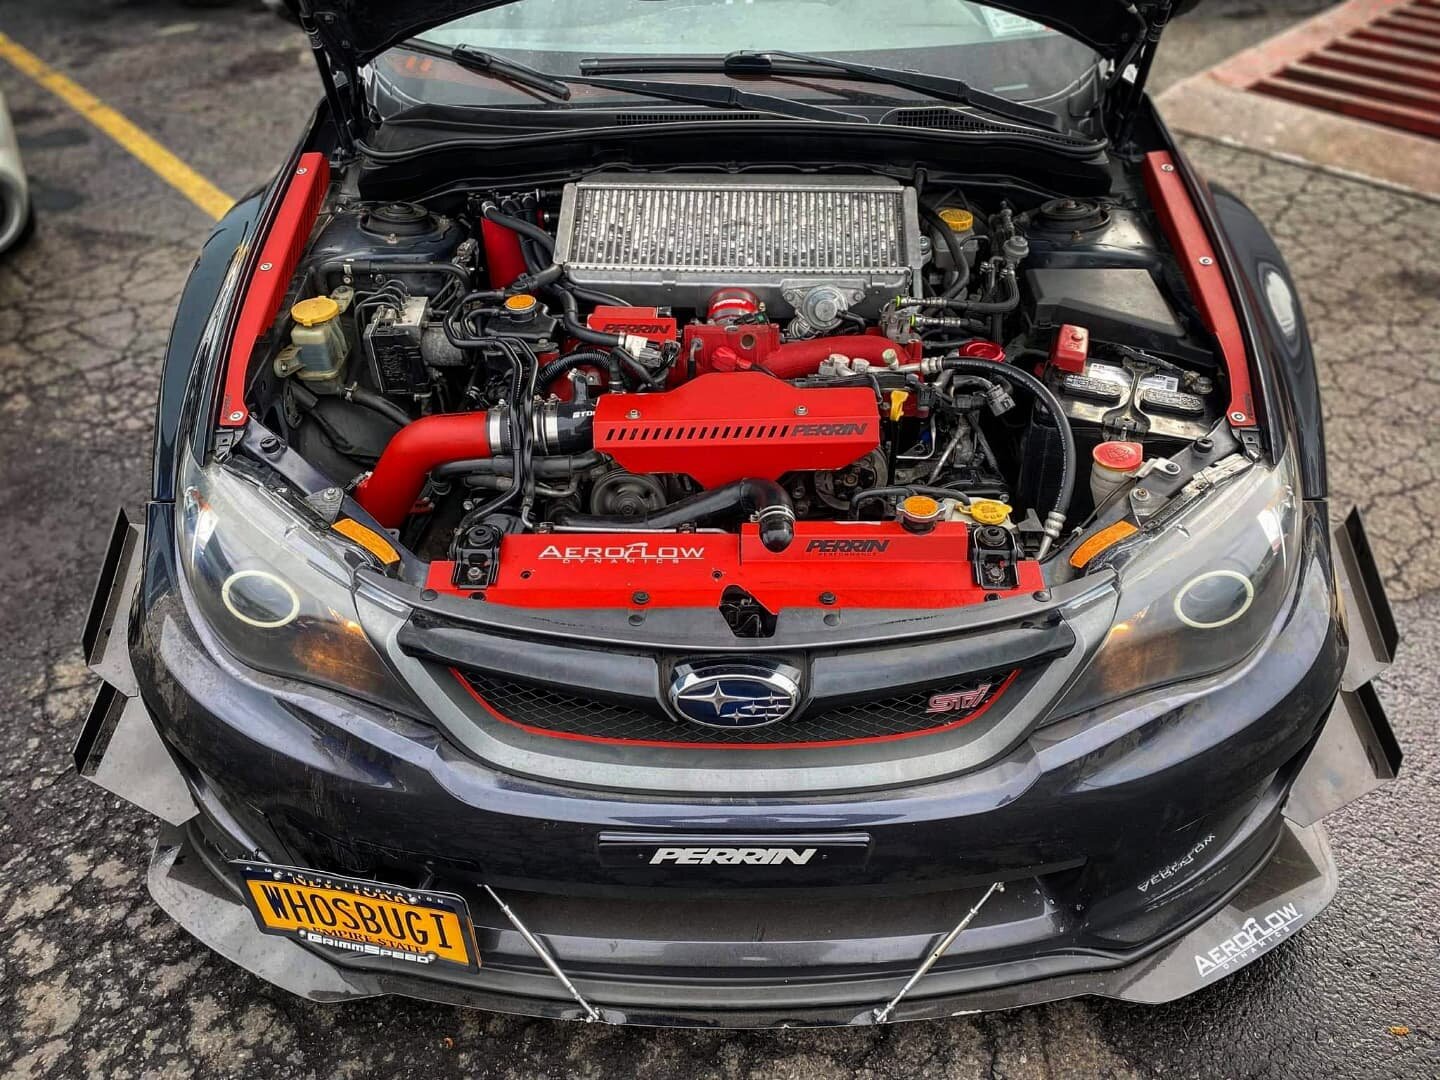 Another STI, setup with an @outfrontmotorsports closed deck EJ25, assembled and ready for the dyno! @iagperformance
Air Oil Separator installed as a standard with all engine builds here at Dialed in Performance. 
.
.
.
.
#subaru #impreza #wrx #sti #e